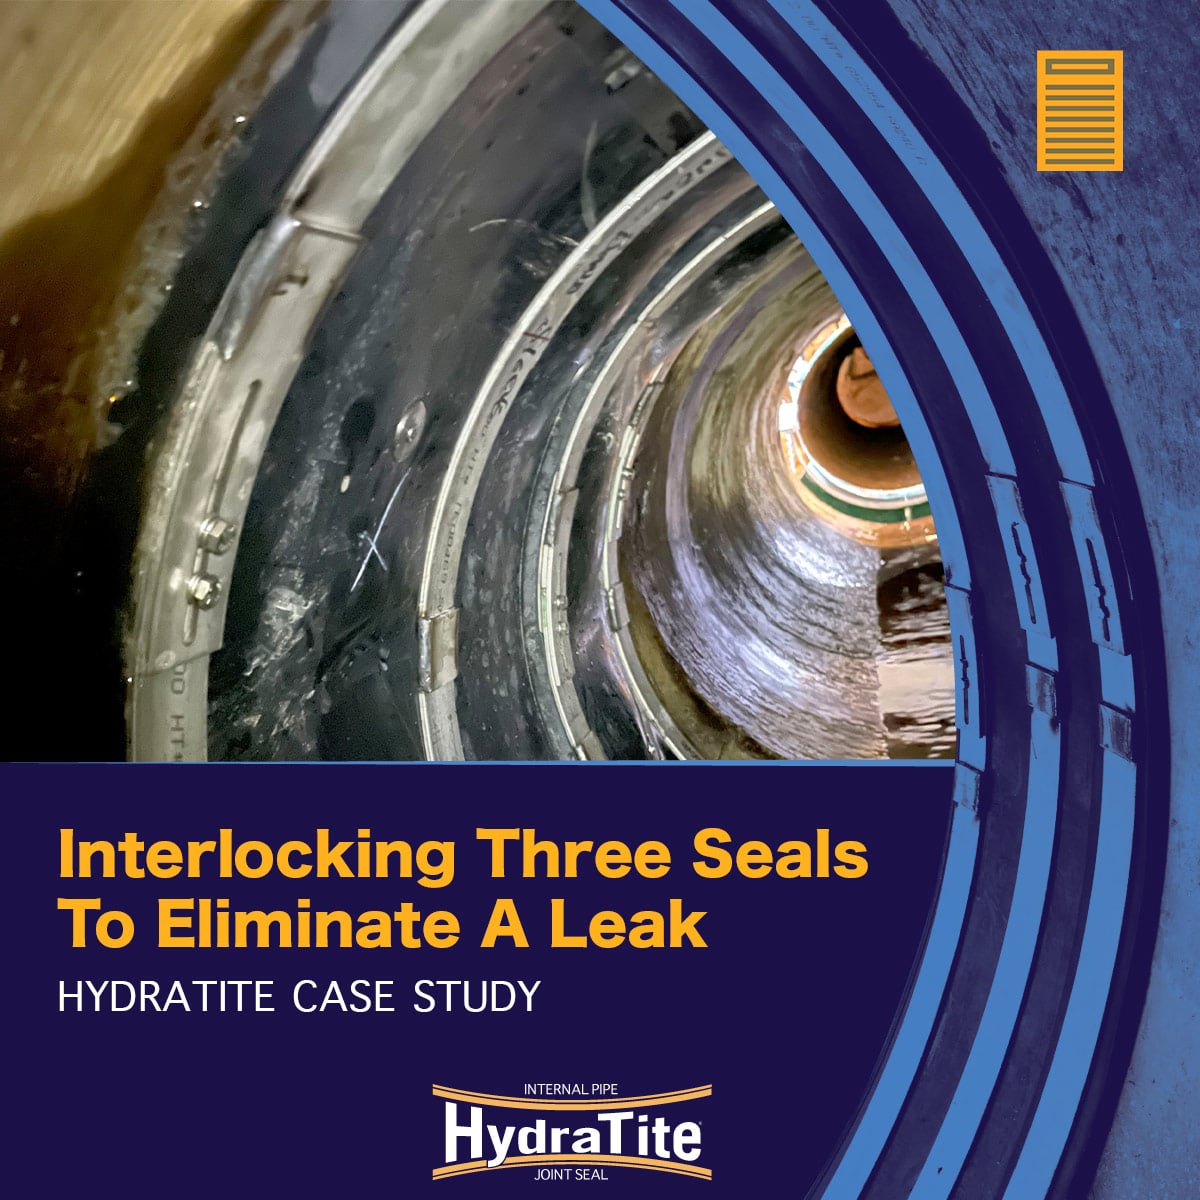 Case Study Teaser Image of Three interlocking seals covering a crack in an RCP, 'Interlocking Three Seals To Eliminate A Leak, HydraTite Case Study'